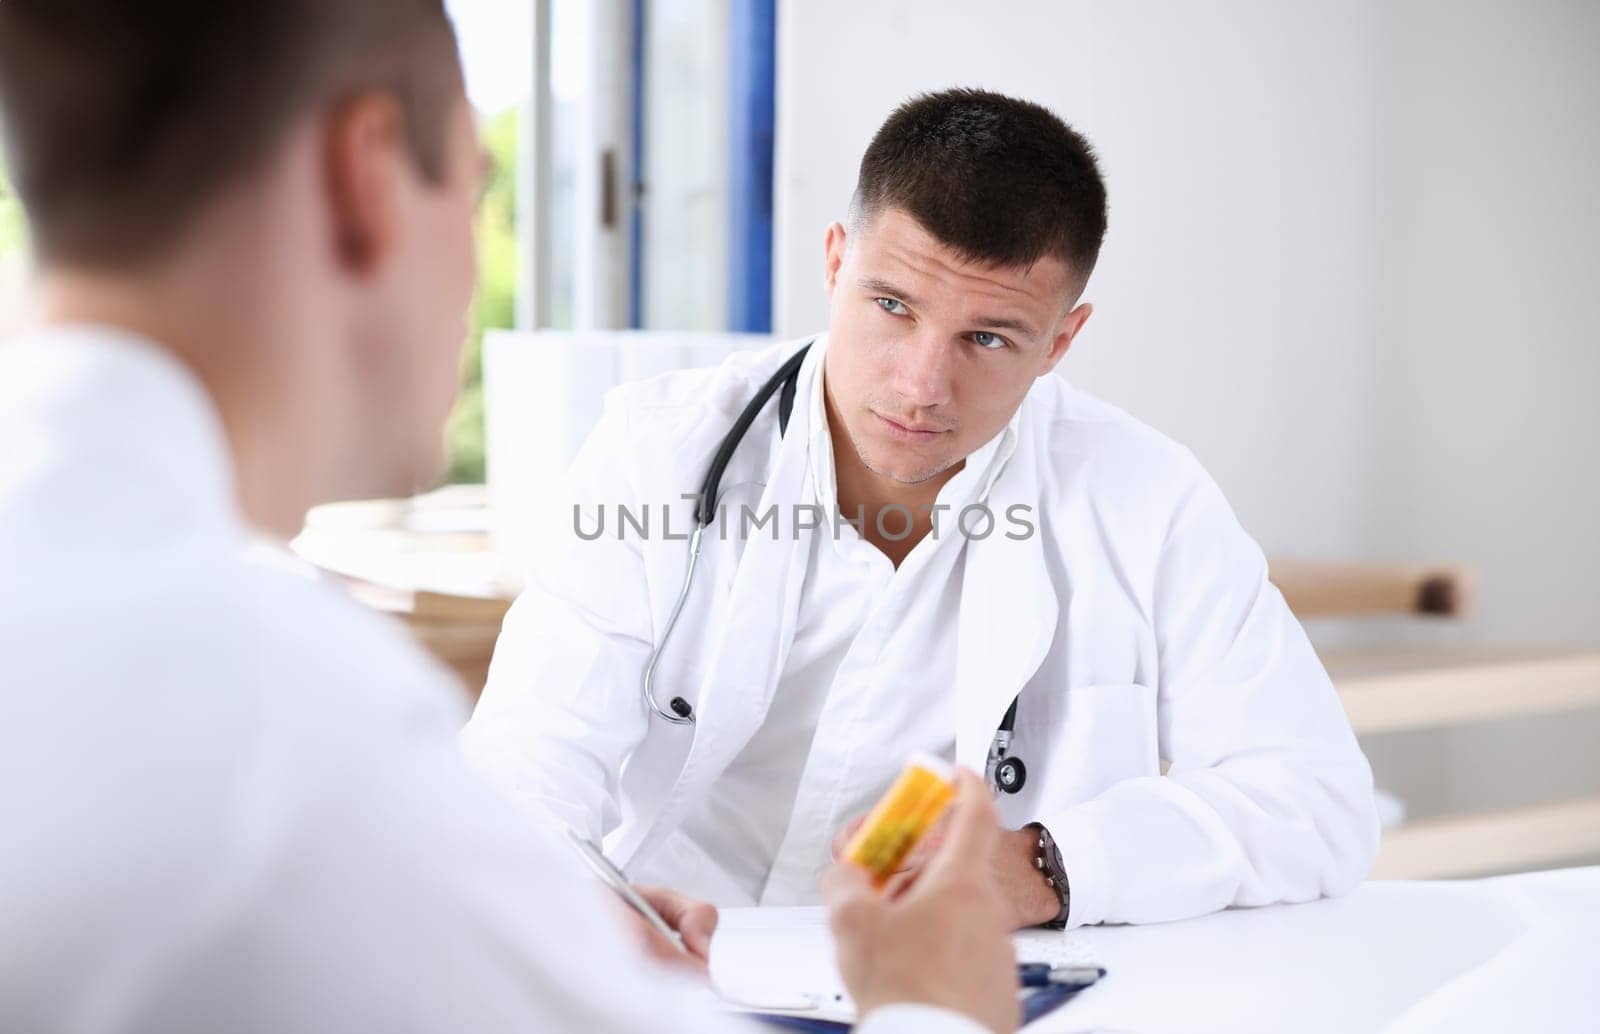 Male medicine doctor write prescription at worktable while patient hand hold jar of pills. Panacea and life save prescribing treatment legal drug store concept empty form ready to be used